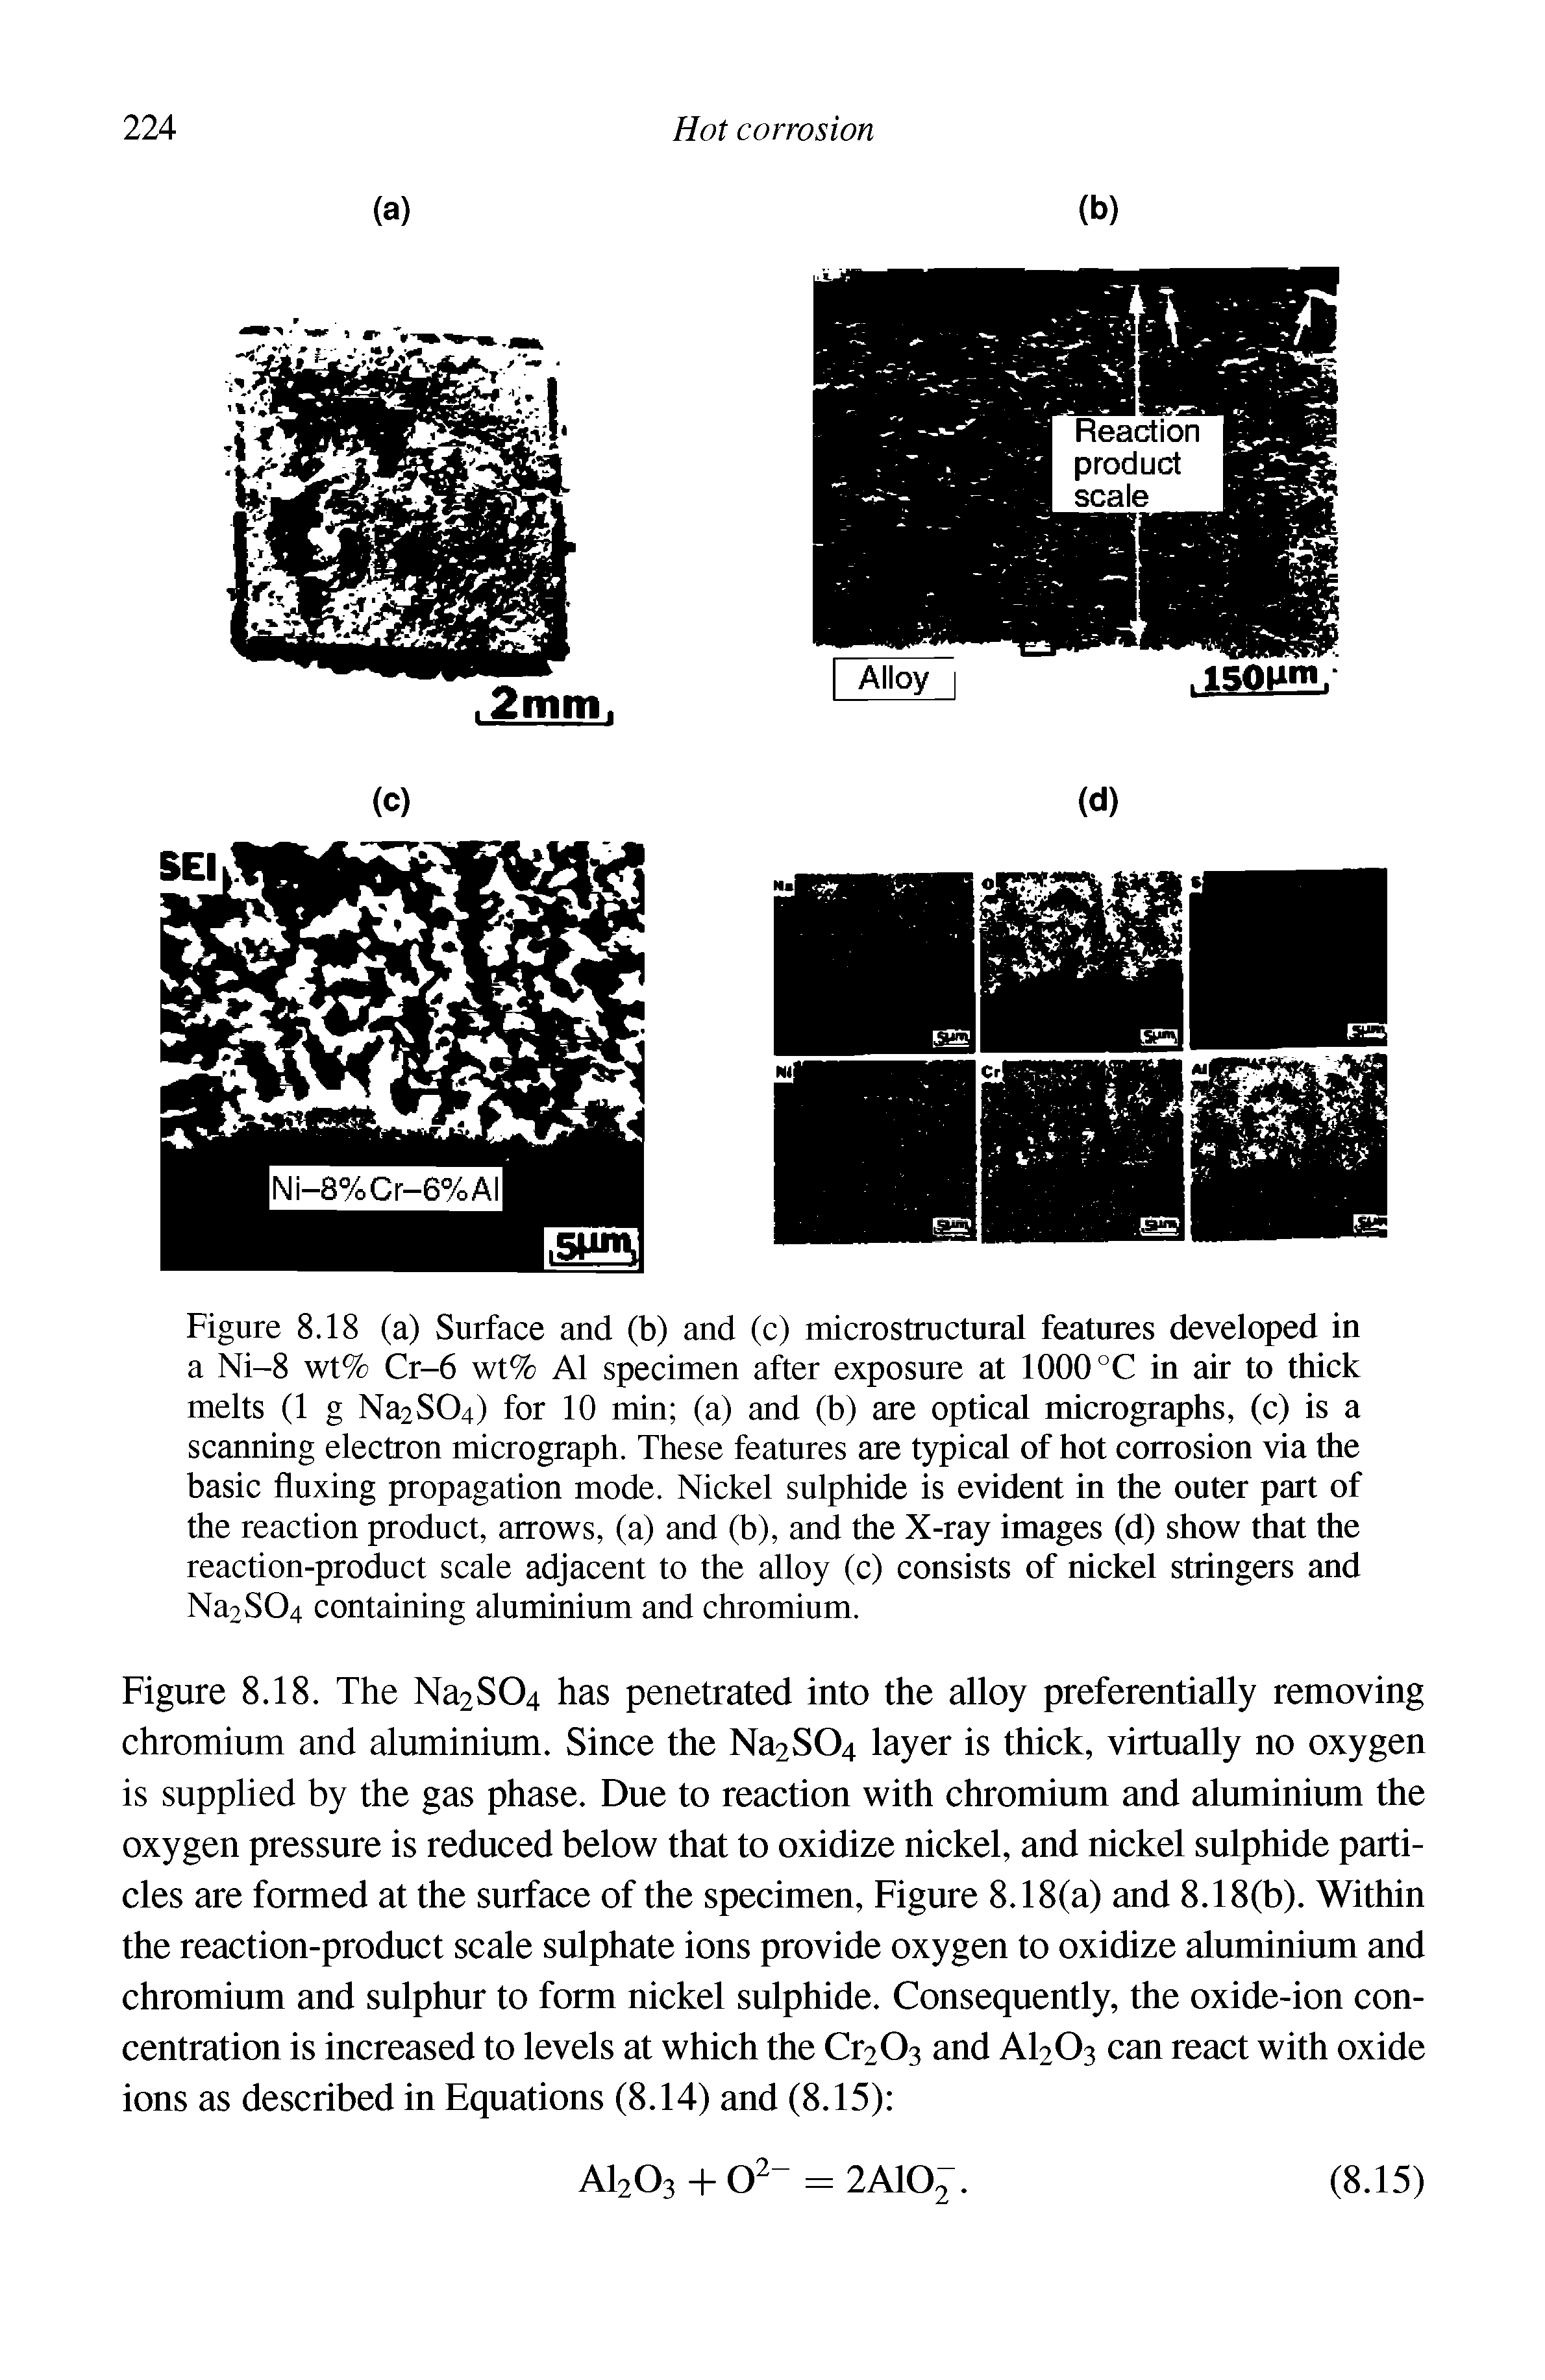 Figure 8.18. The Na2S04 has penetrated into the alloy preferentially removing chromium and aluminium. Since the Na2S04 layer is thick, virtually no oxygen is supplied by the gas phase. Due to reaction with chromium and aluminium the oxygen pressure is reduced below that to oxidize nickel, and nickel sulphide particles are formed at the surface of the specimen. Figure 8.18(a) and 8.18(b). Within the reaction-product scale sulphate ions provide oxygen to oxidize aluminium and chromium and sulphur to form nickel sulphide. Consequently, the oxide-ion concentration is increased to levels at which the Cr203 and AI2O3 can react with oxide ions as described in Equations (8.14) and (8.15) ...